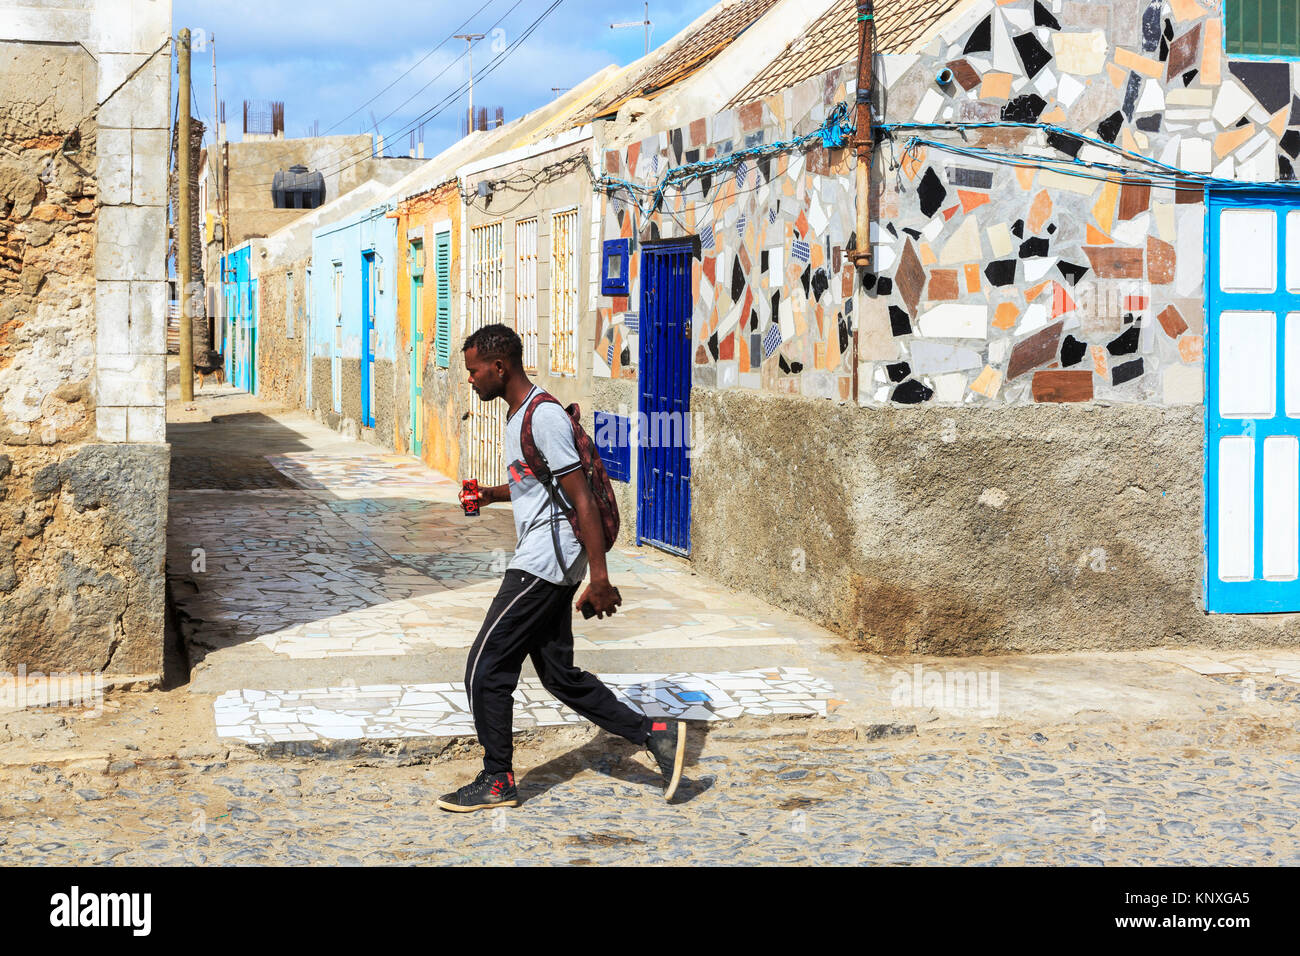 Local walking past traditional housing in a back street of Santa Maria, Sal, Salinas, Cape Verde, Africa Stock Photo